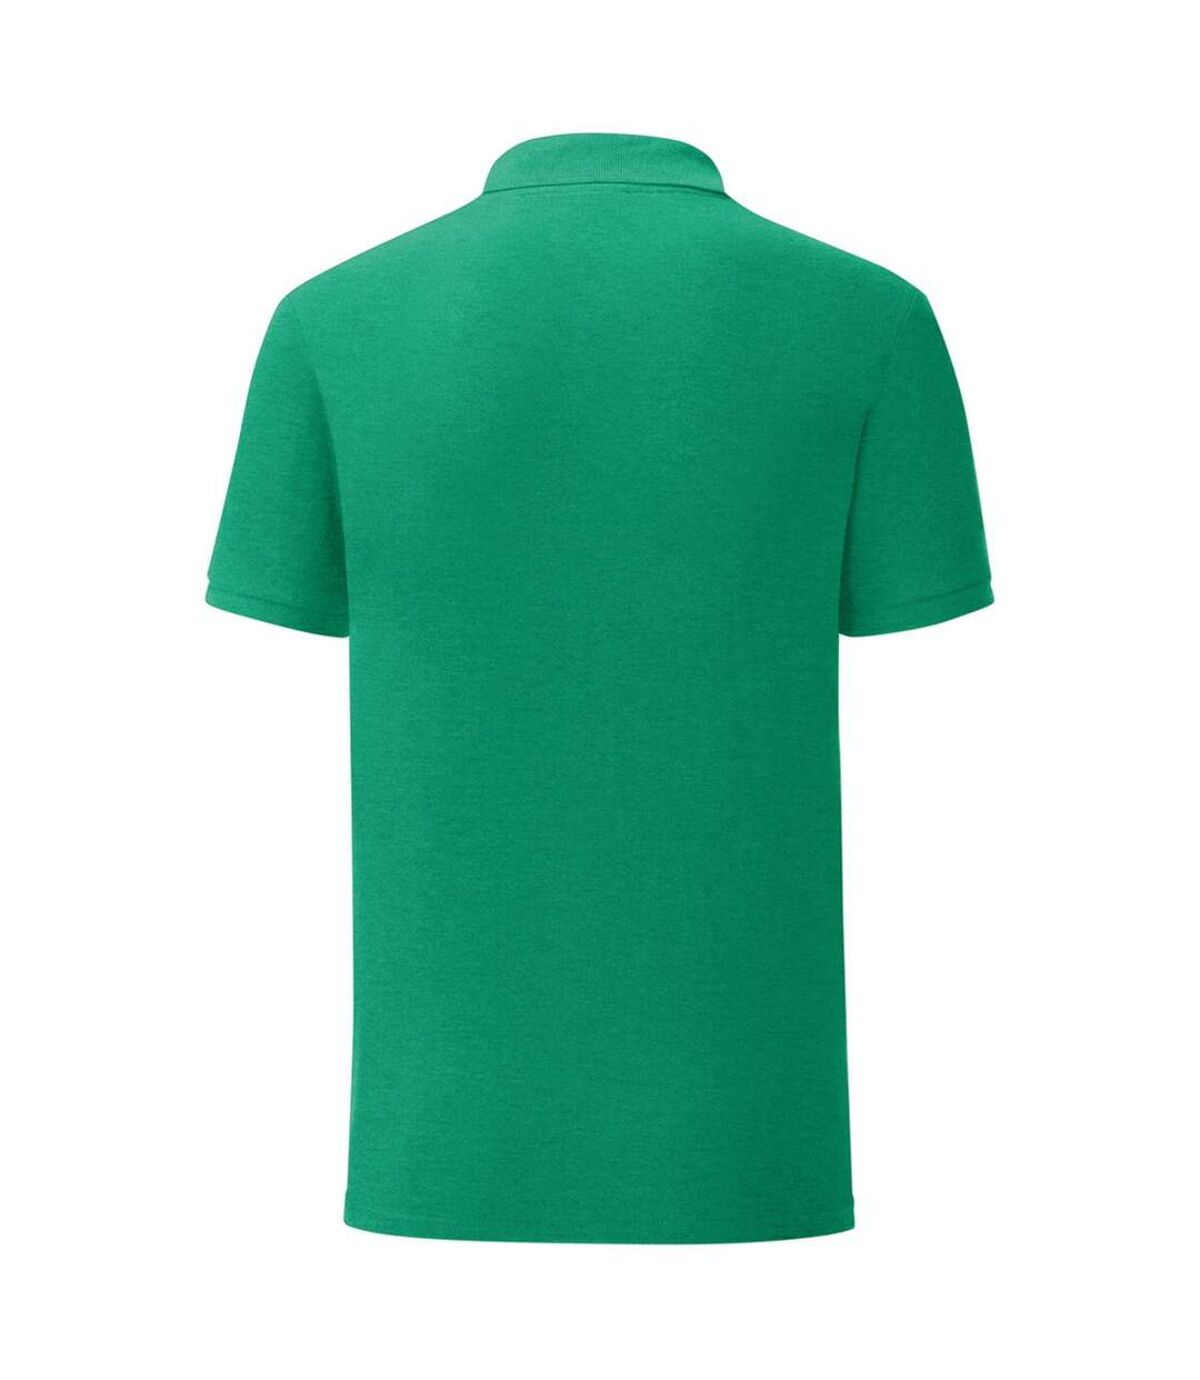 Fruit Of The Loom Mens Iconic Pique Polo Shirt (Heather Green) - UTPC3571